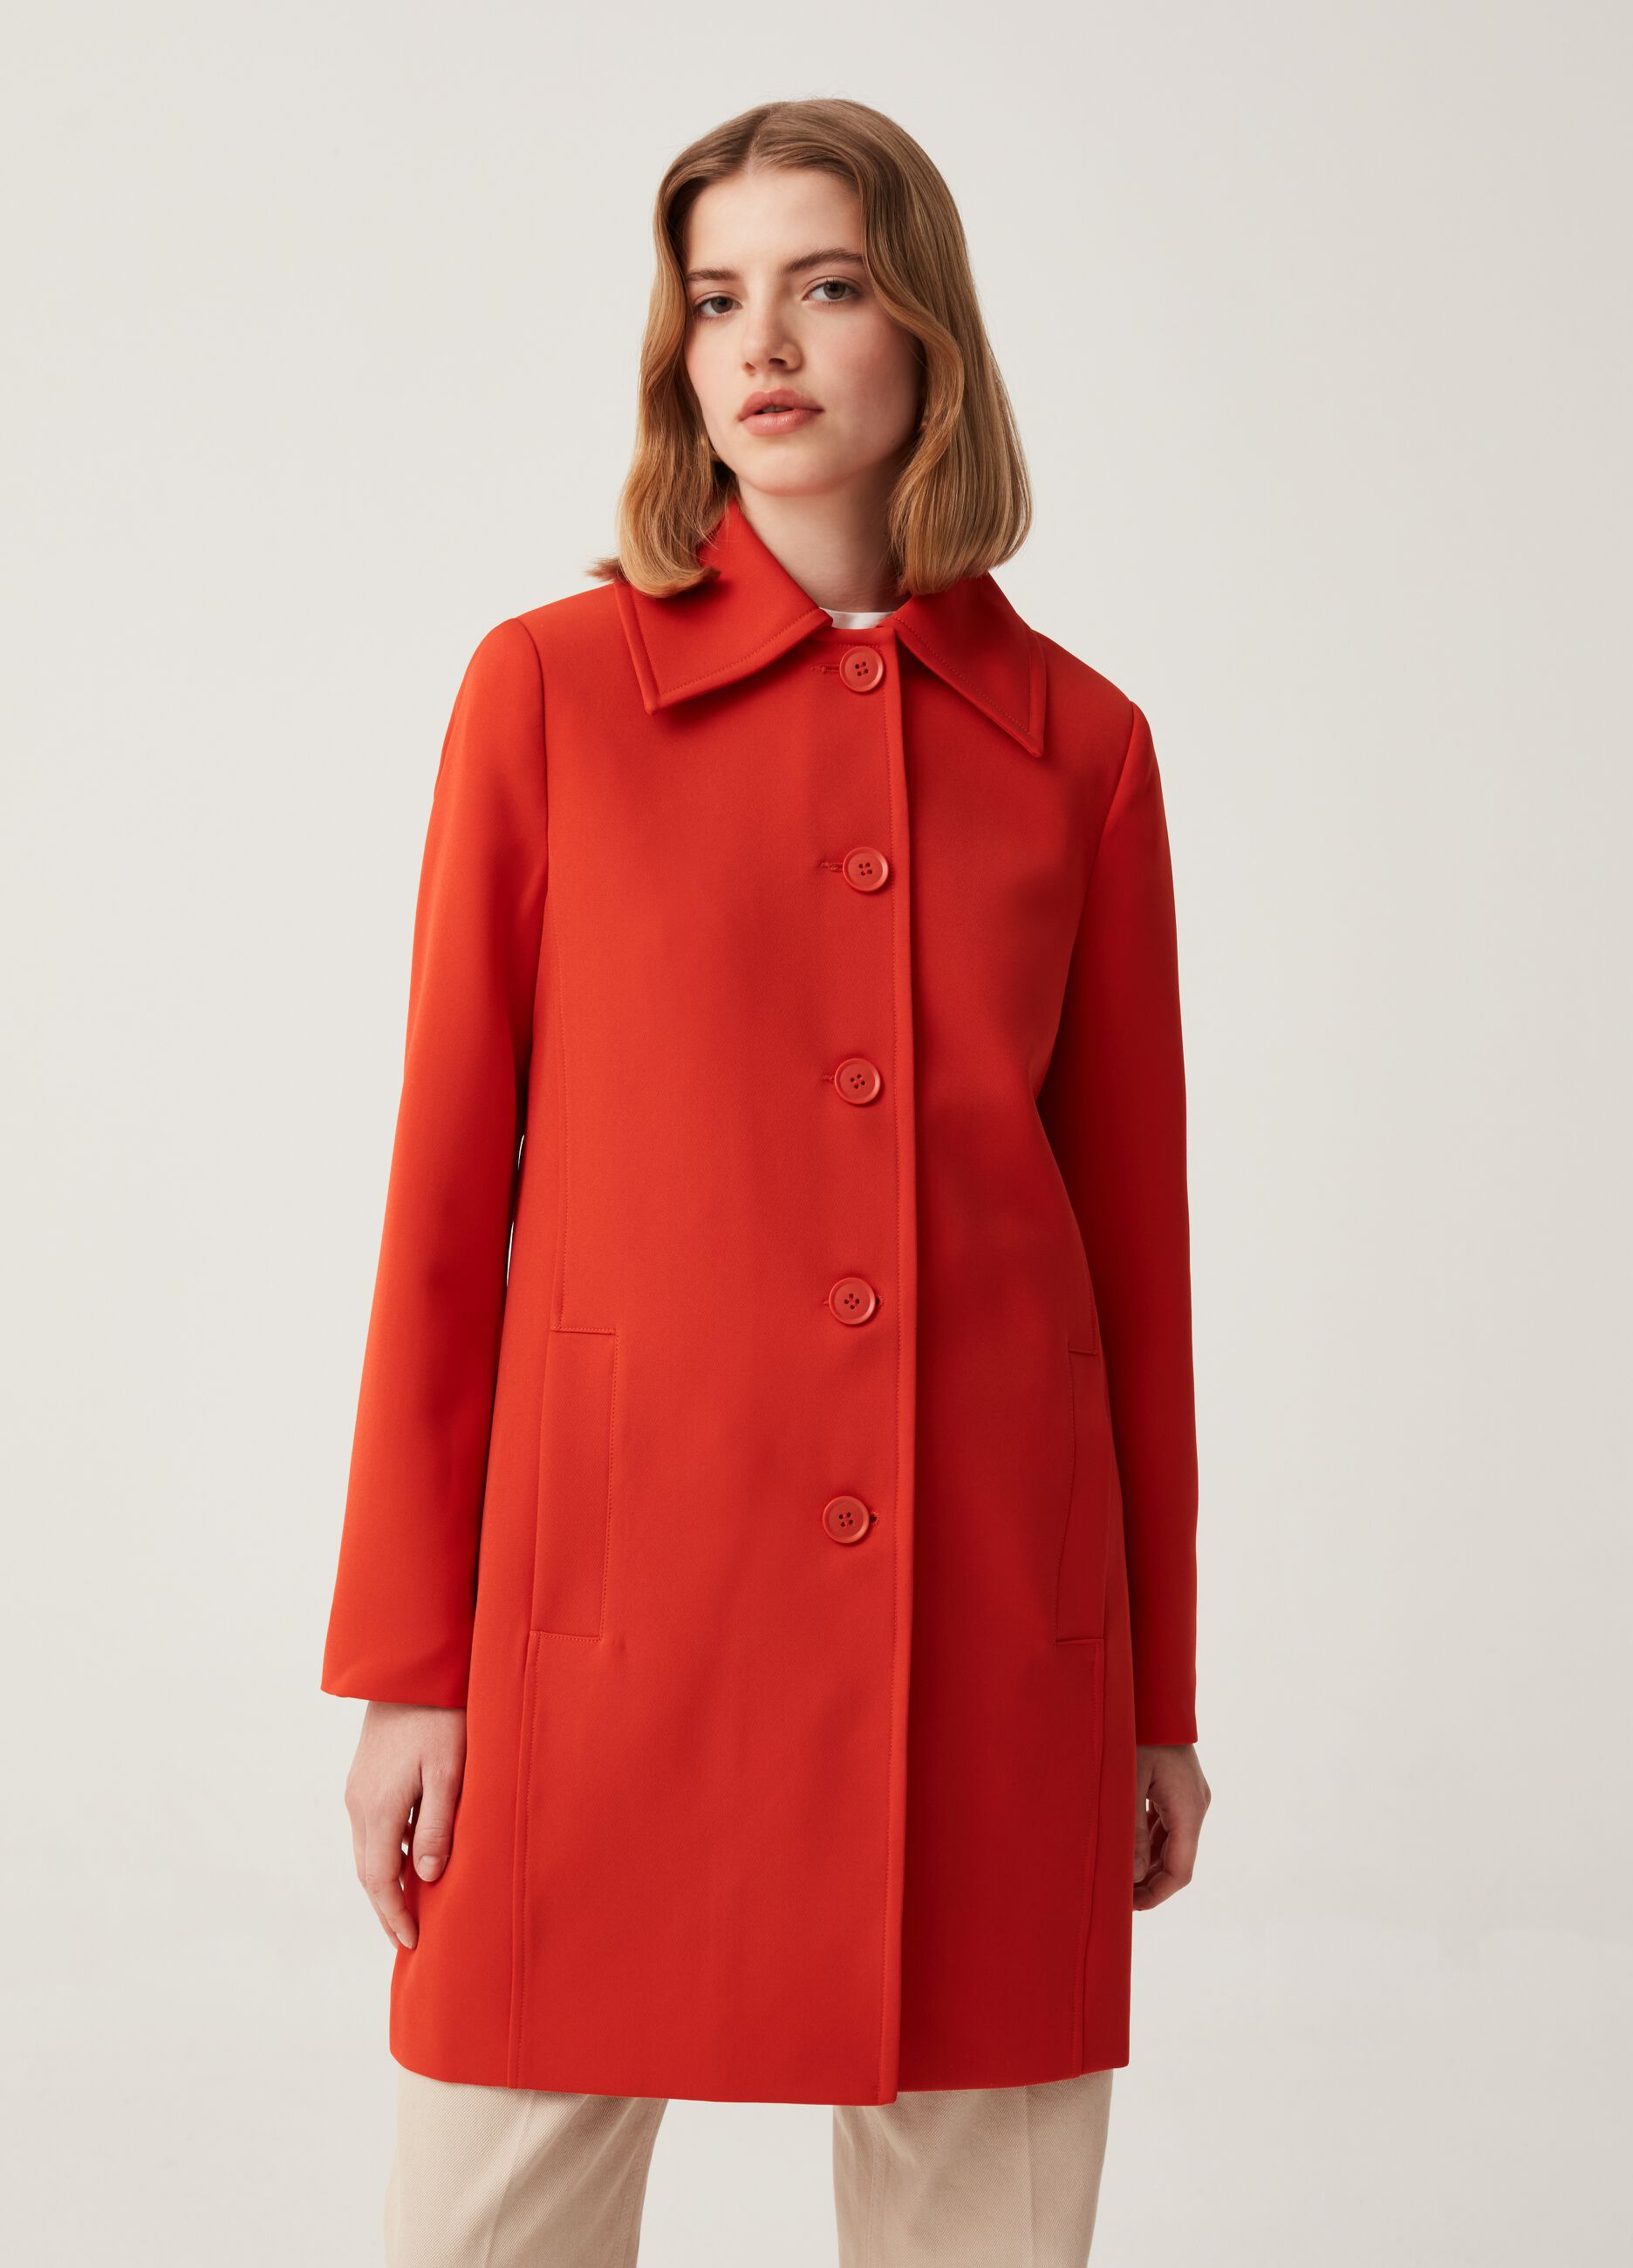 Solid colour, lightweight coat